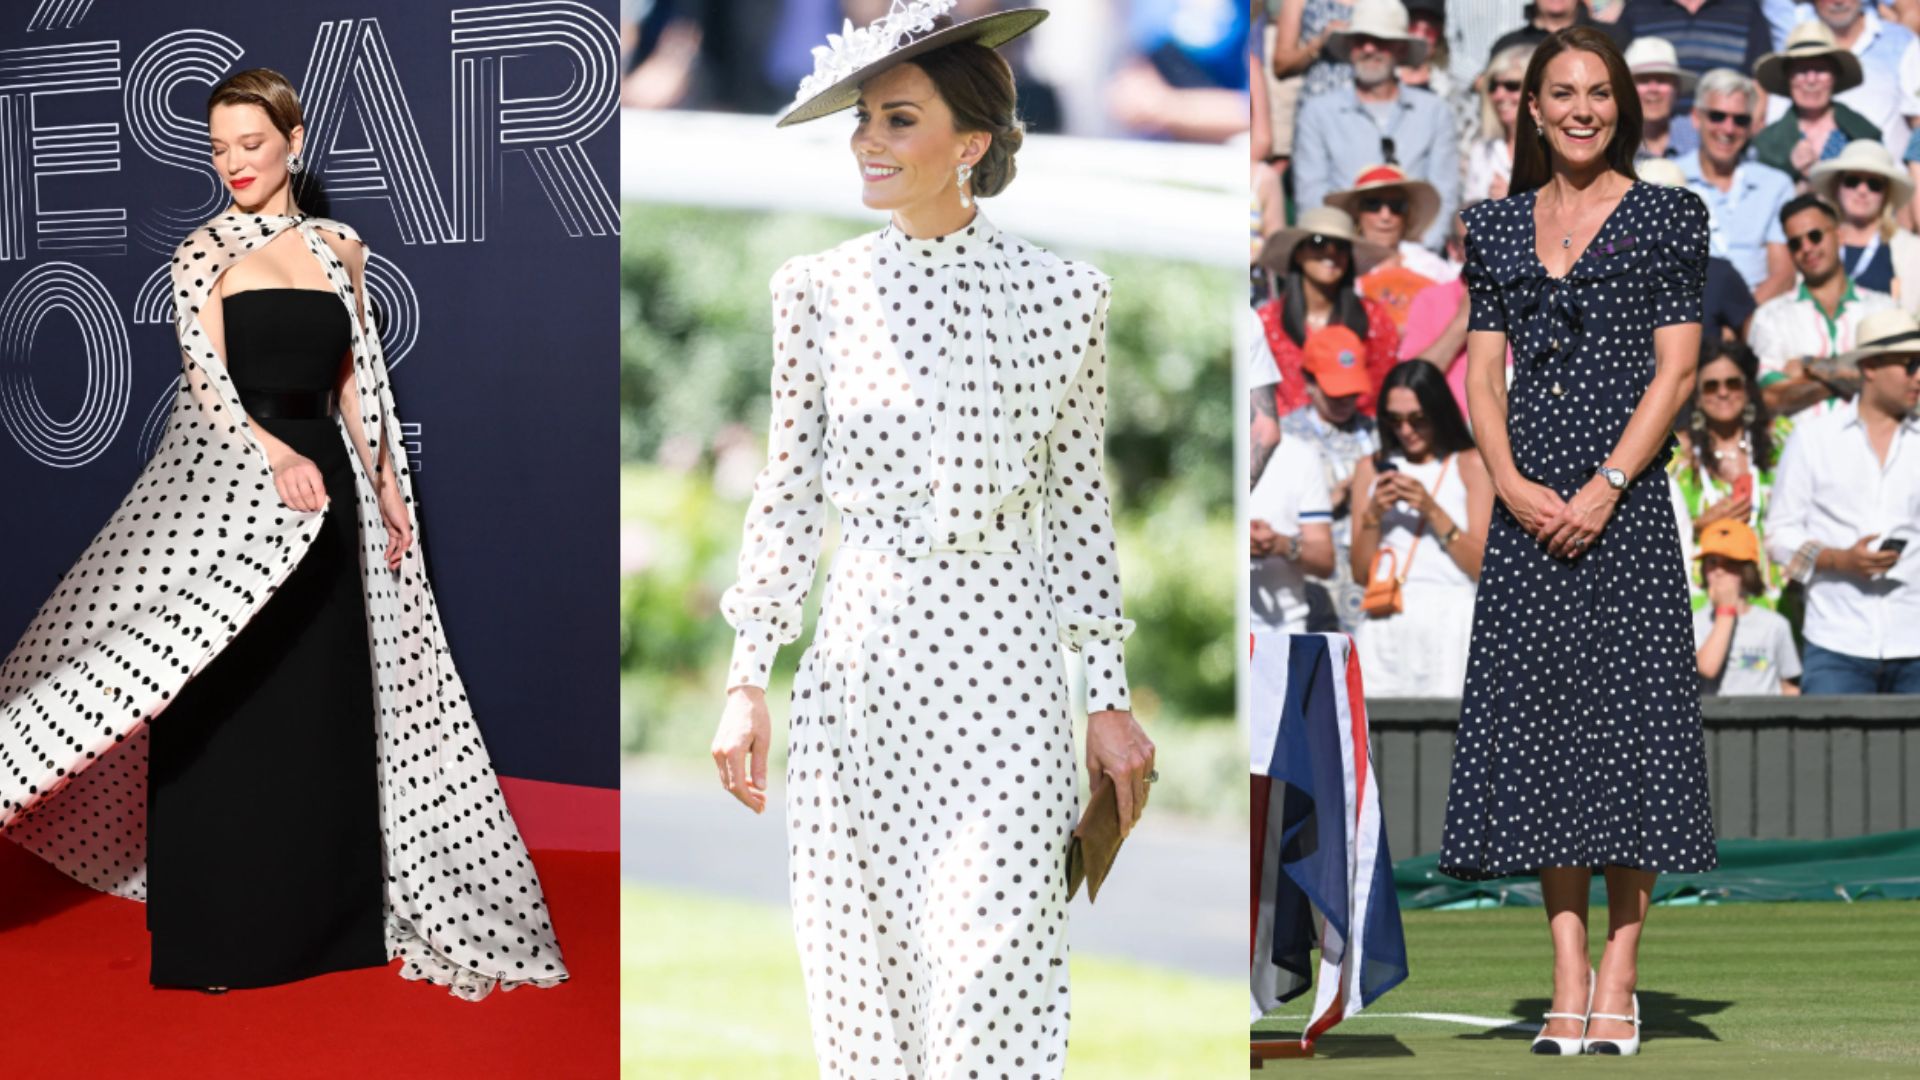 The Return of Polka Dots To The Fashion World in 2022